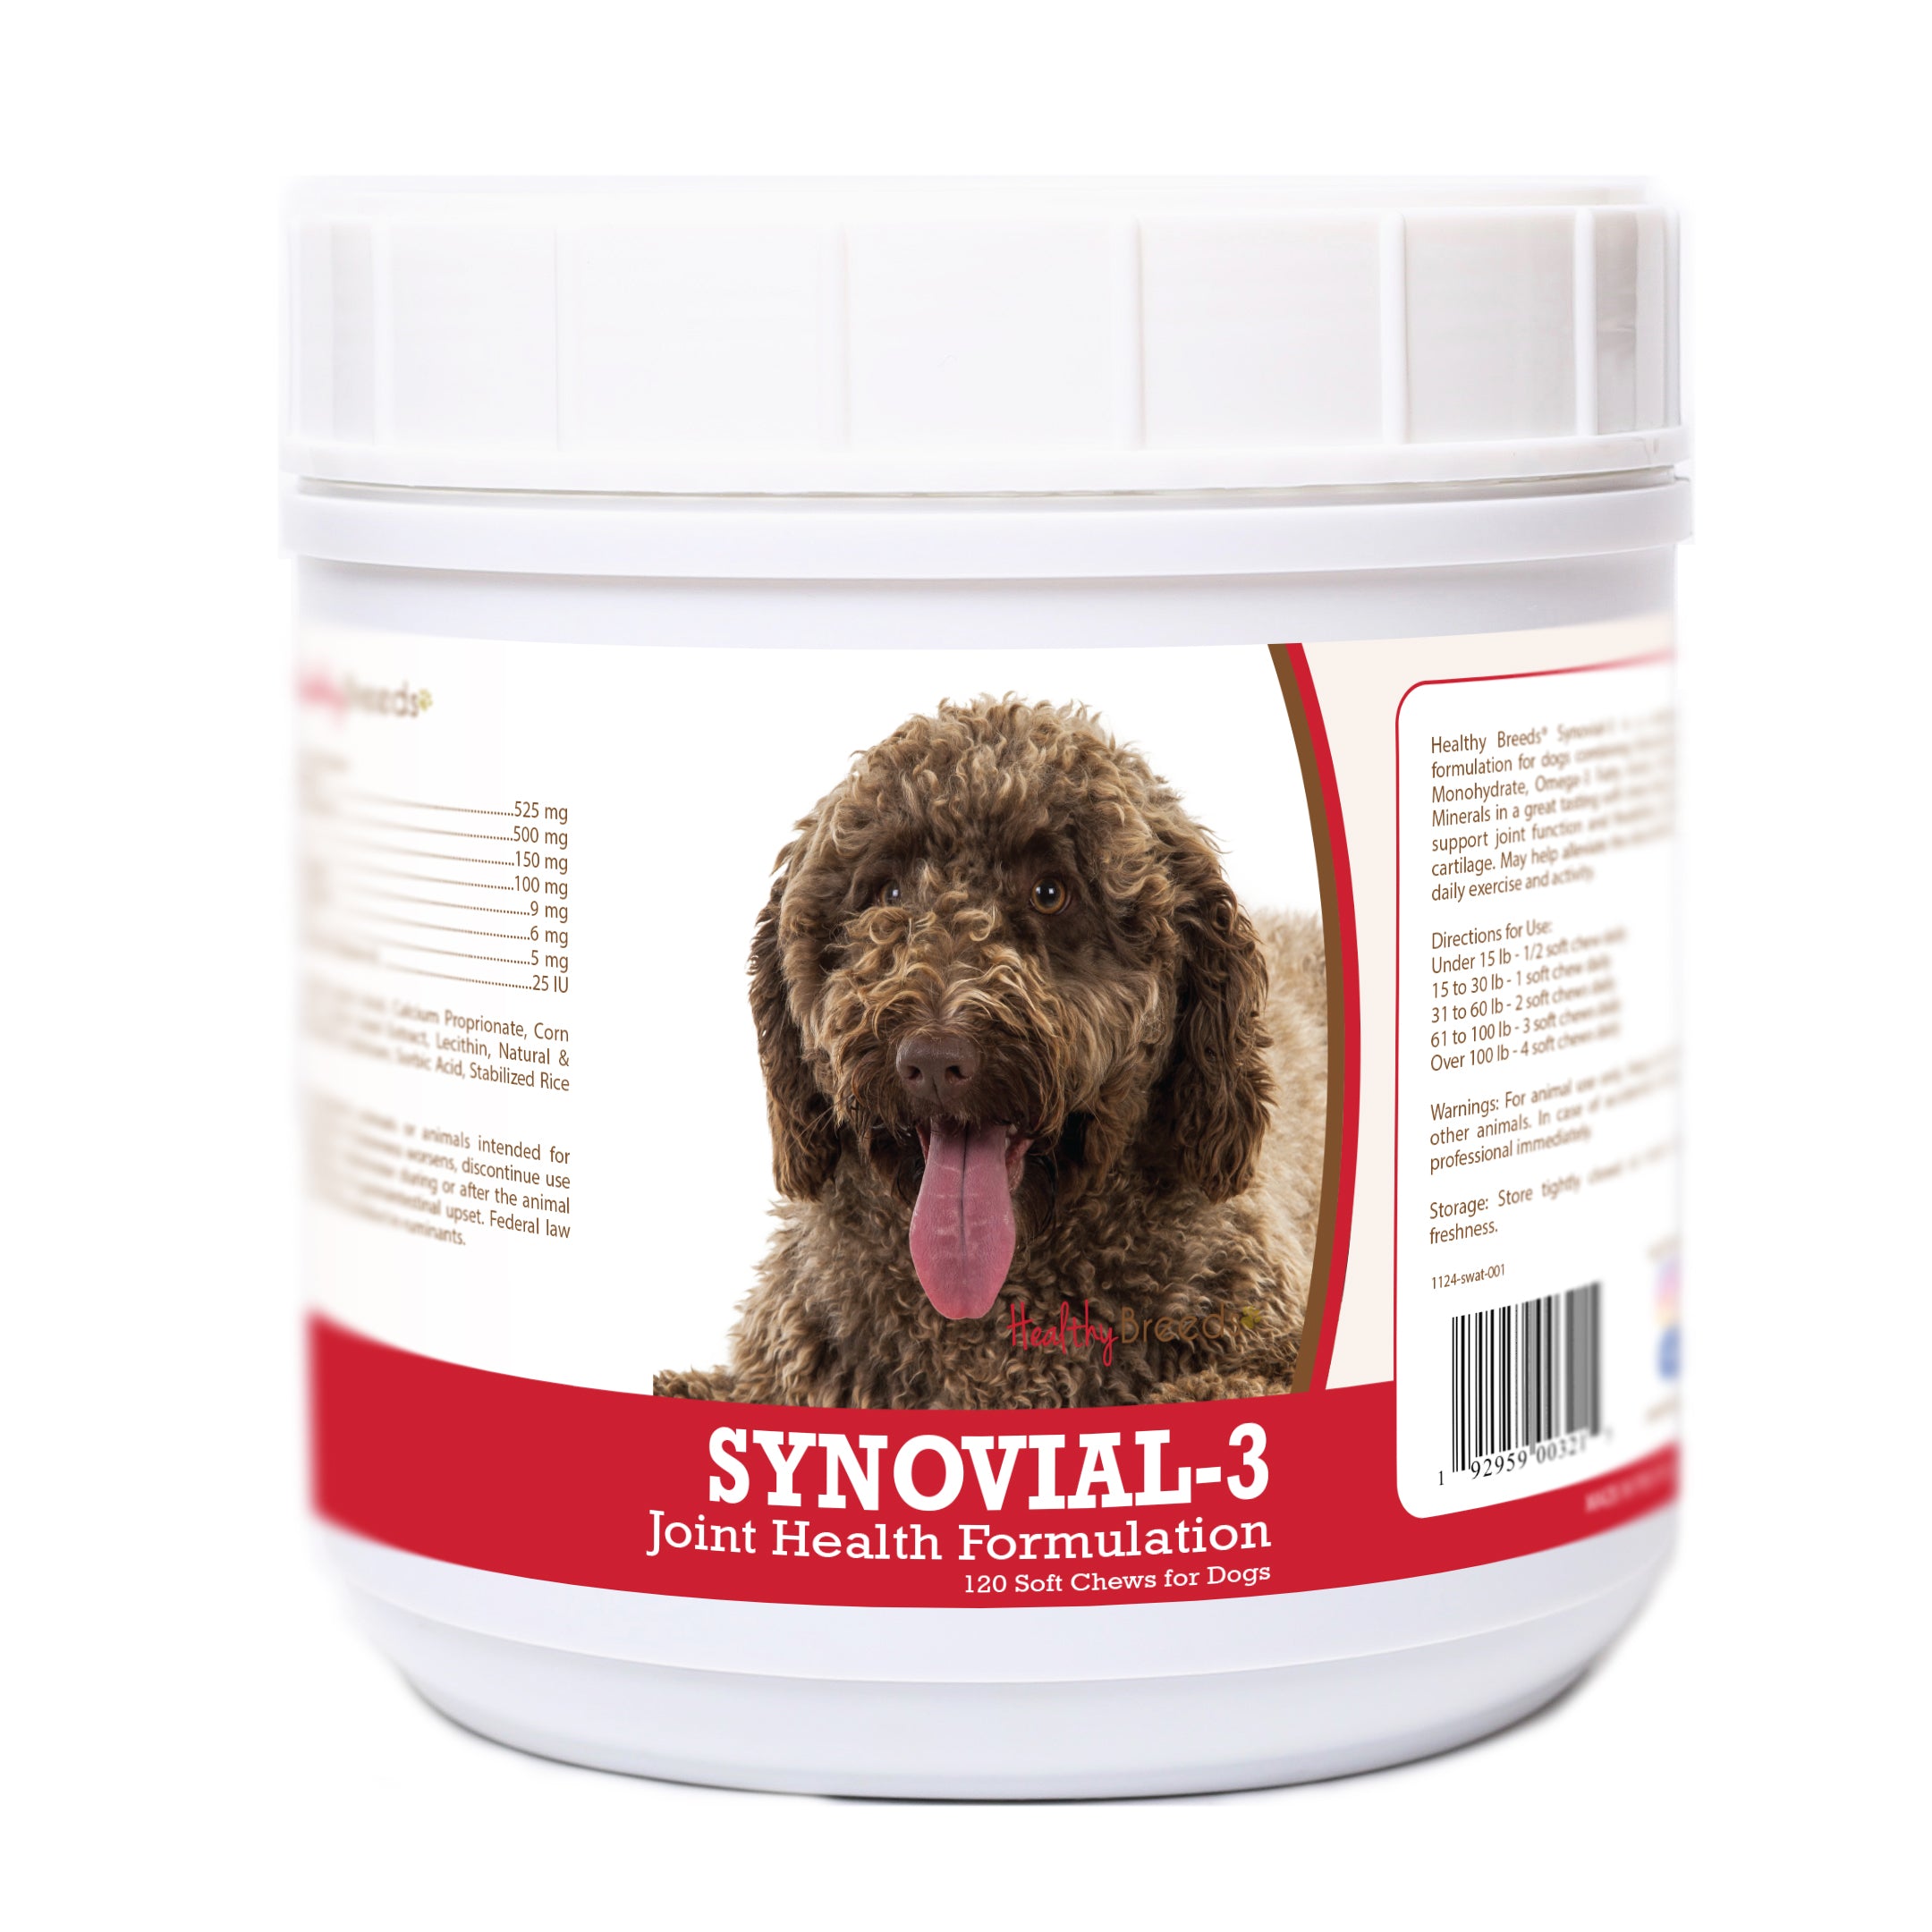 Spanish Water Dog Synovial-3 Joint Health Formulation Soft Chews 120 Count